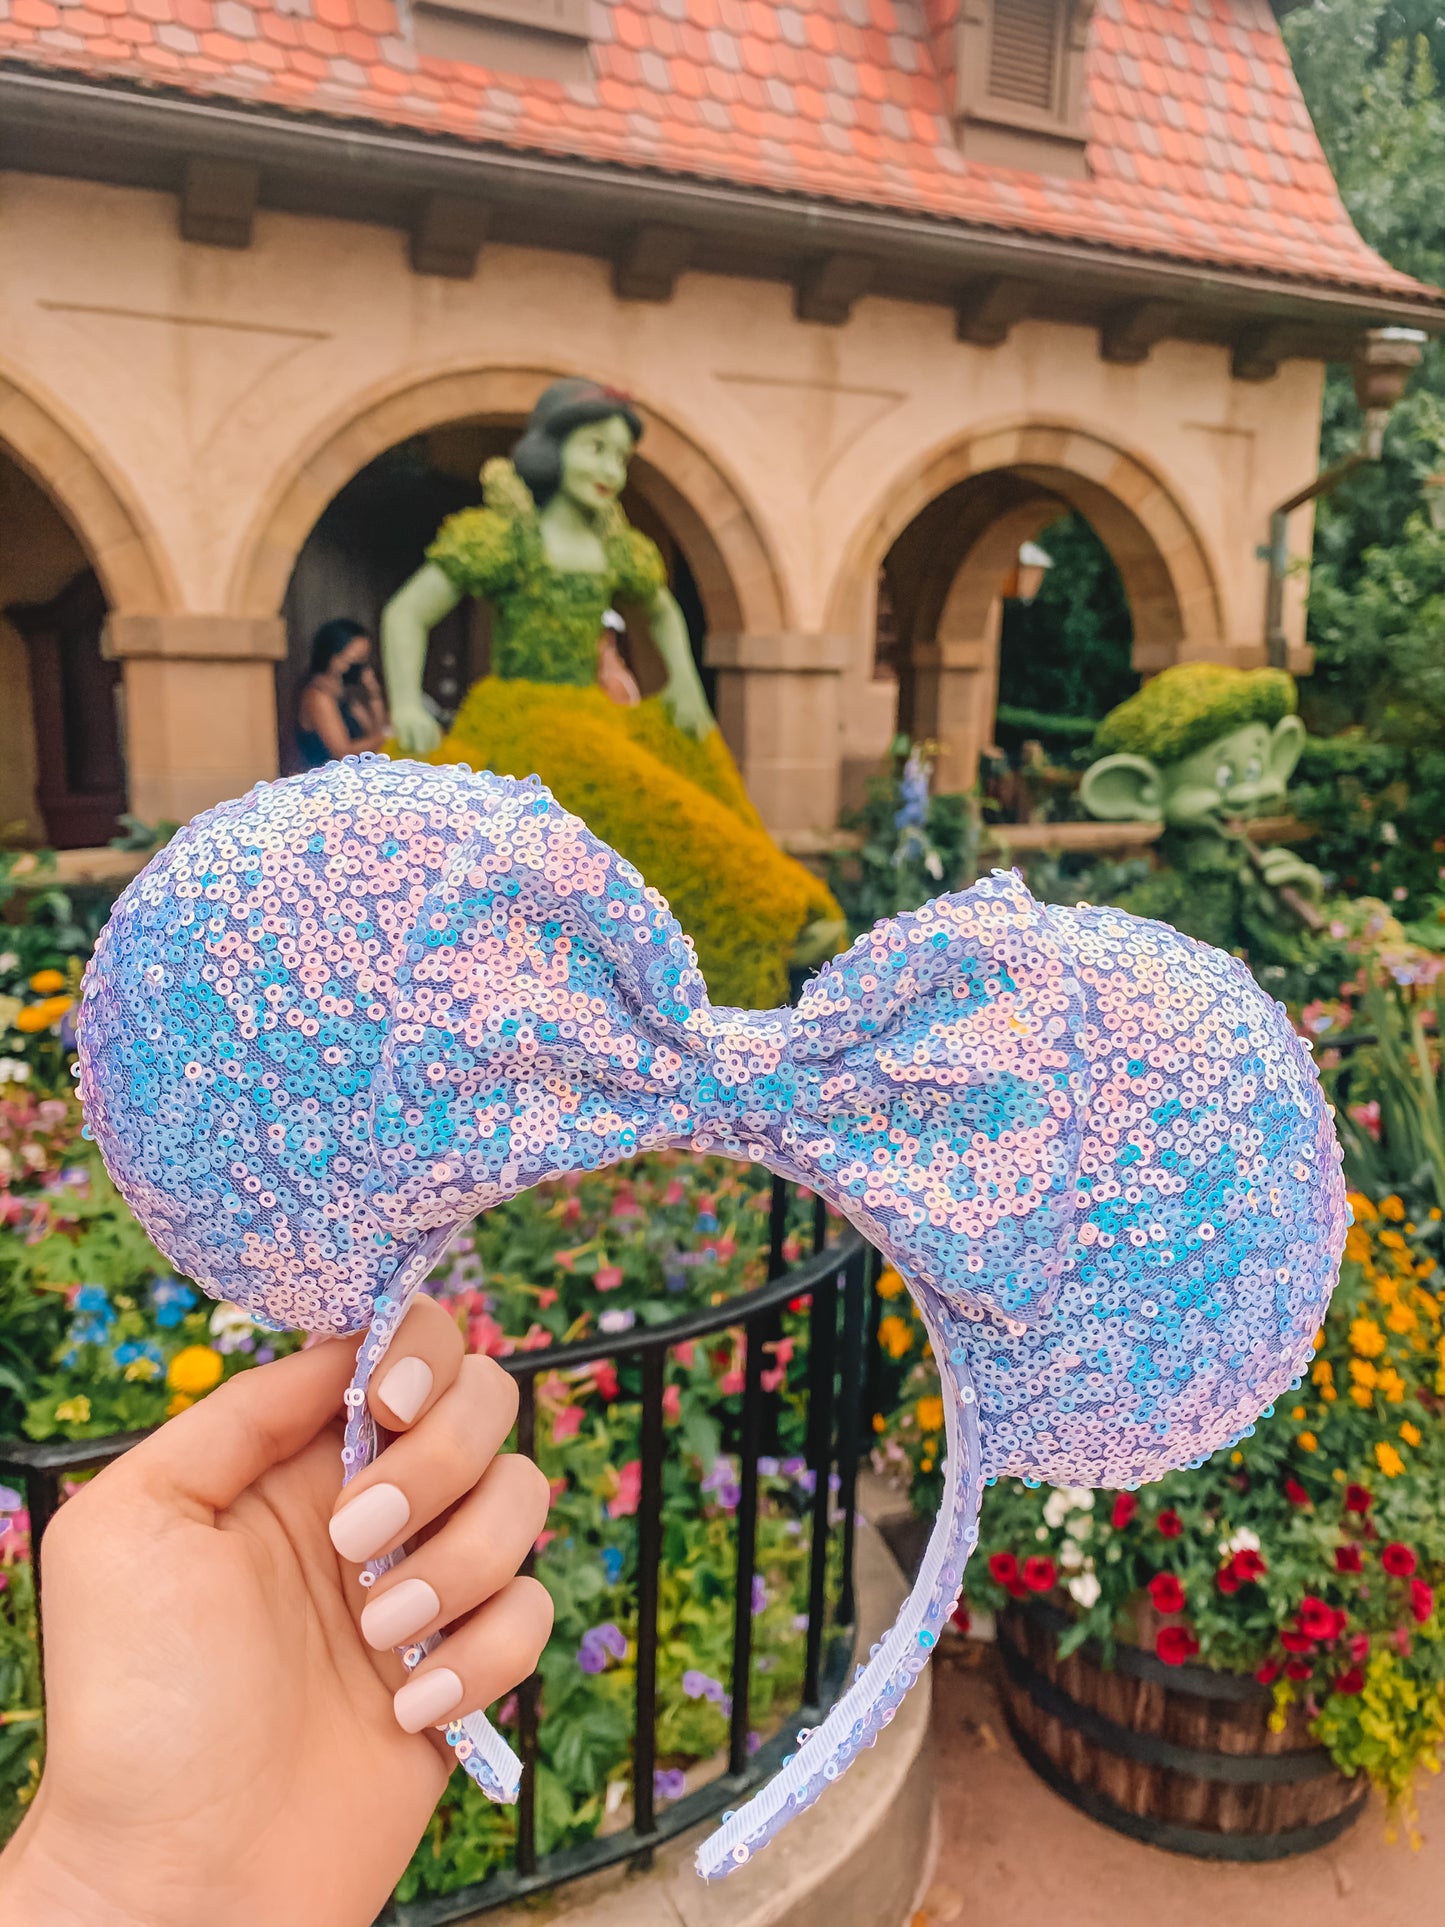 Lavender Iridescent Mouse Ears!